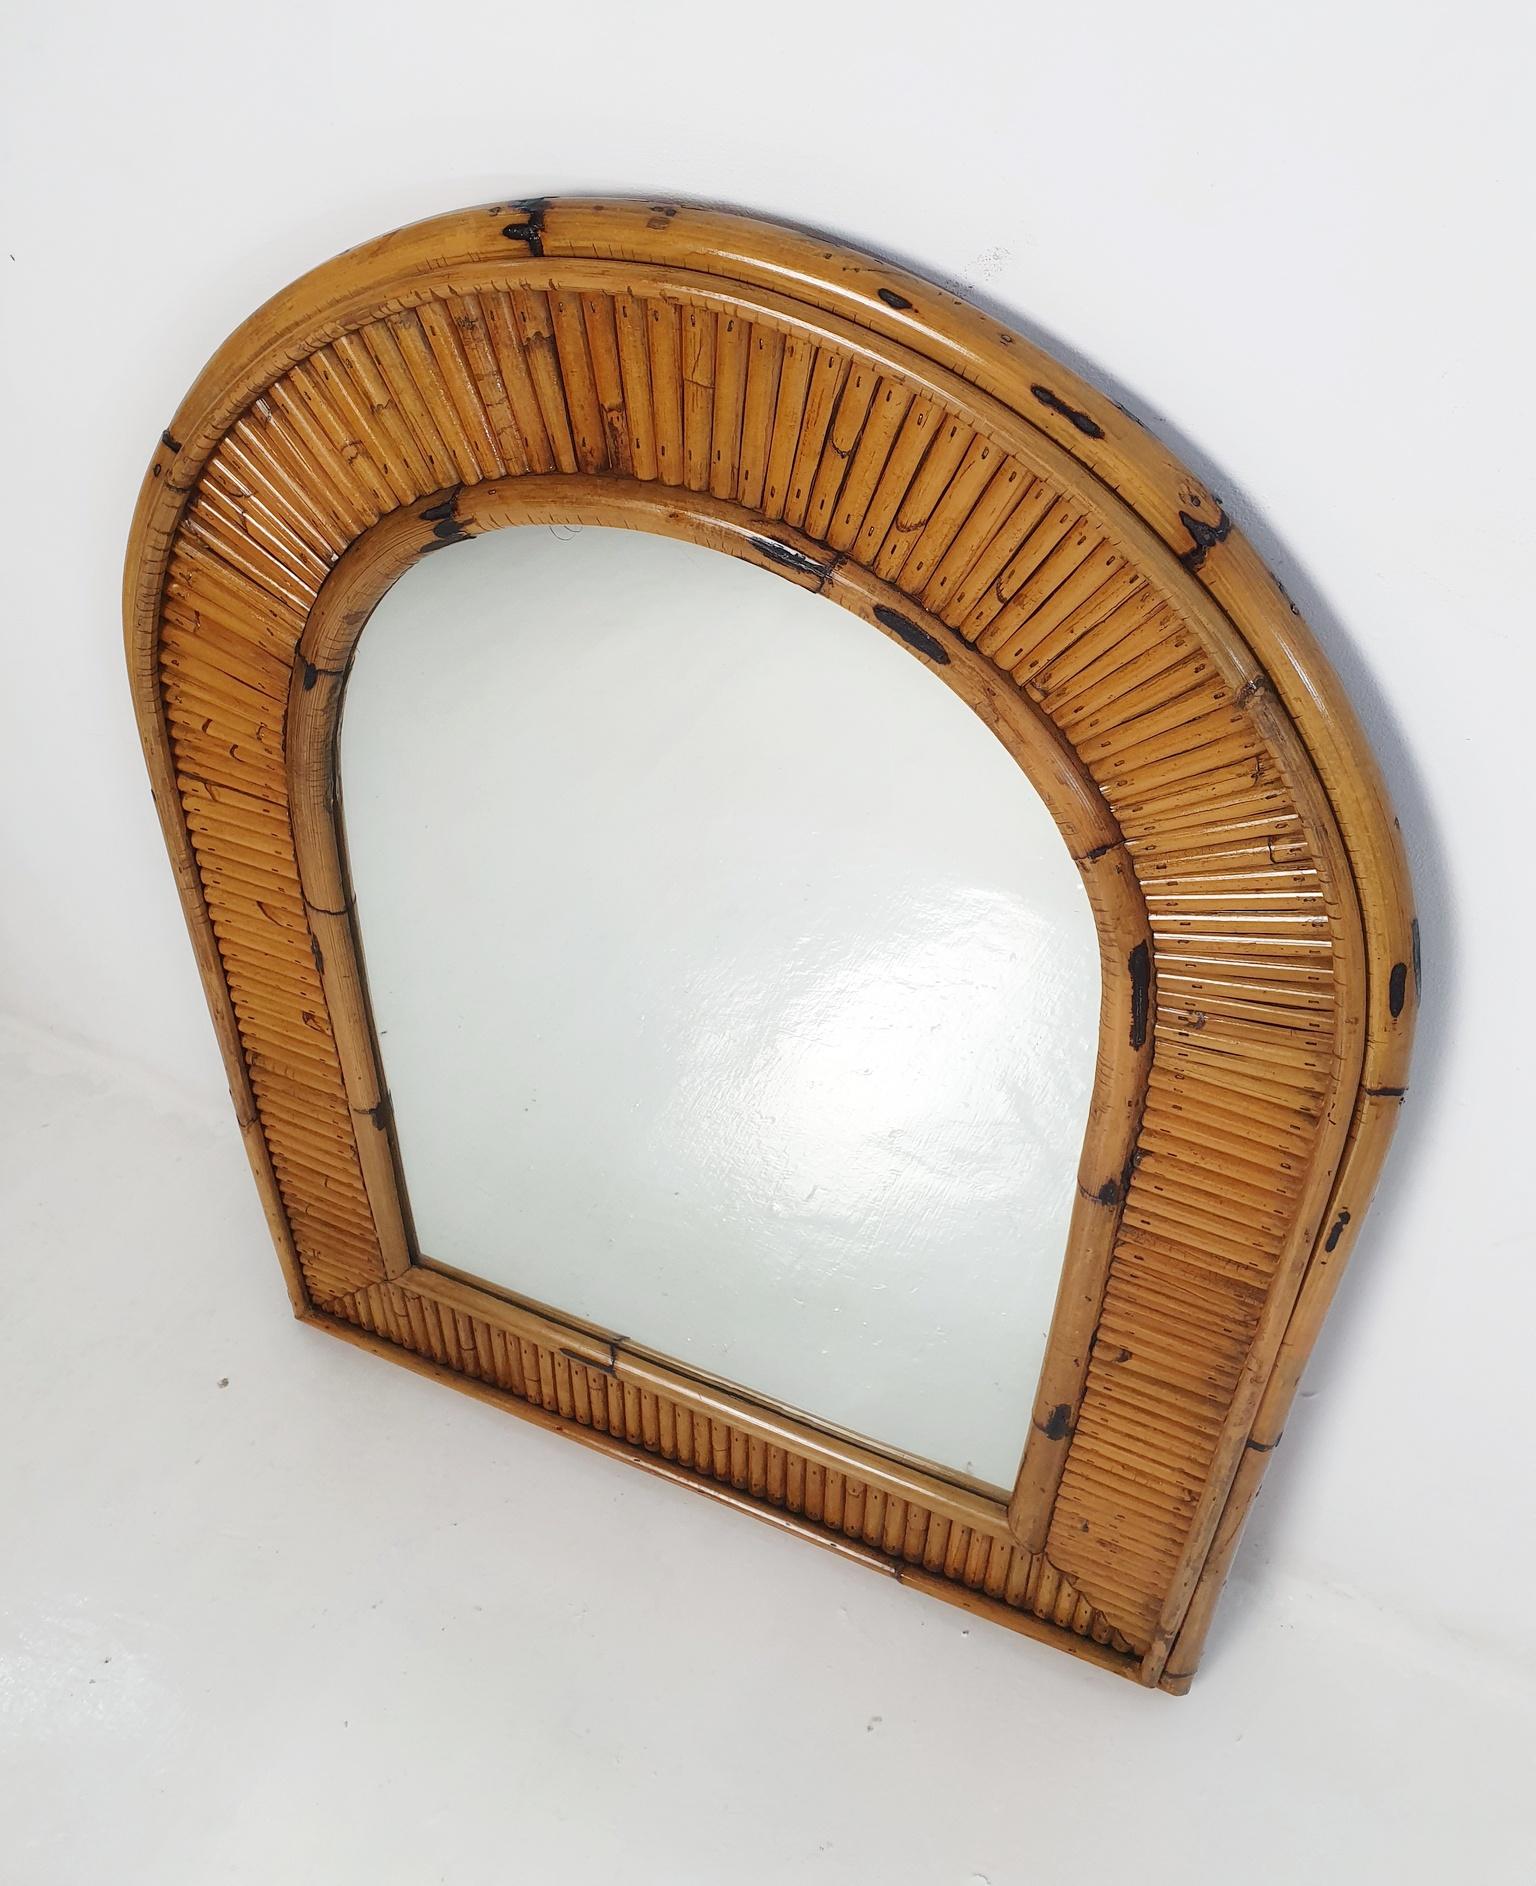 Italian Arched Bamboo Mirror by Vivai del Sud Italy, 1960s For Sale